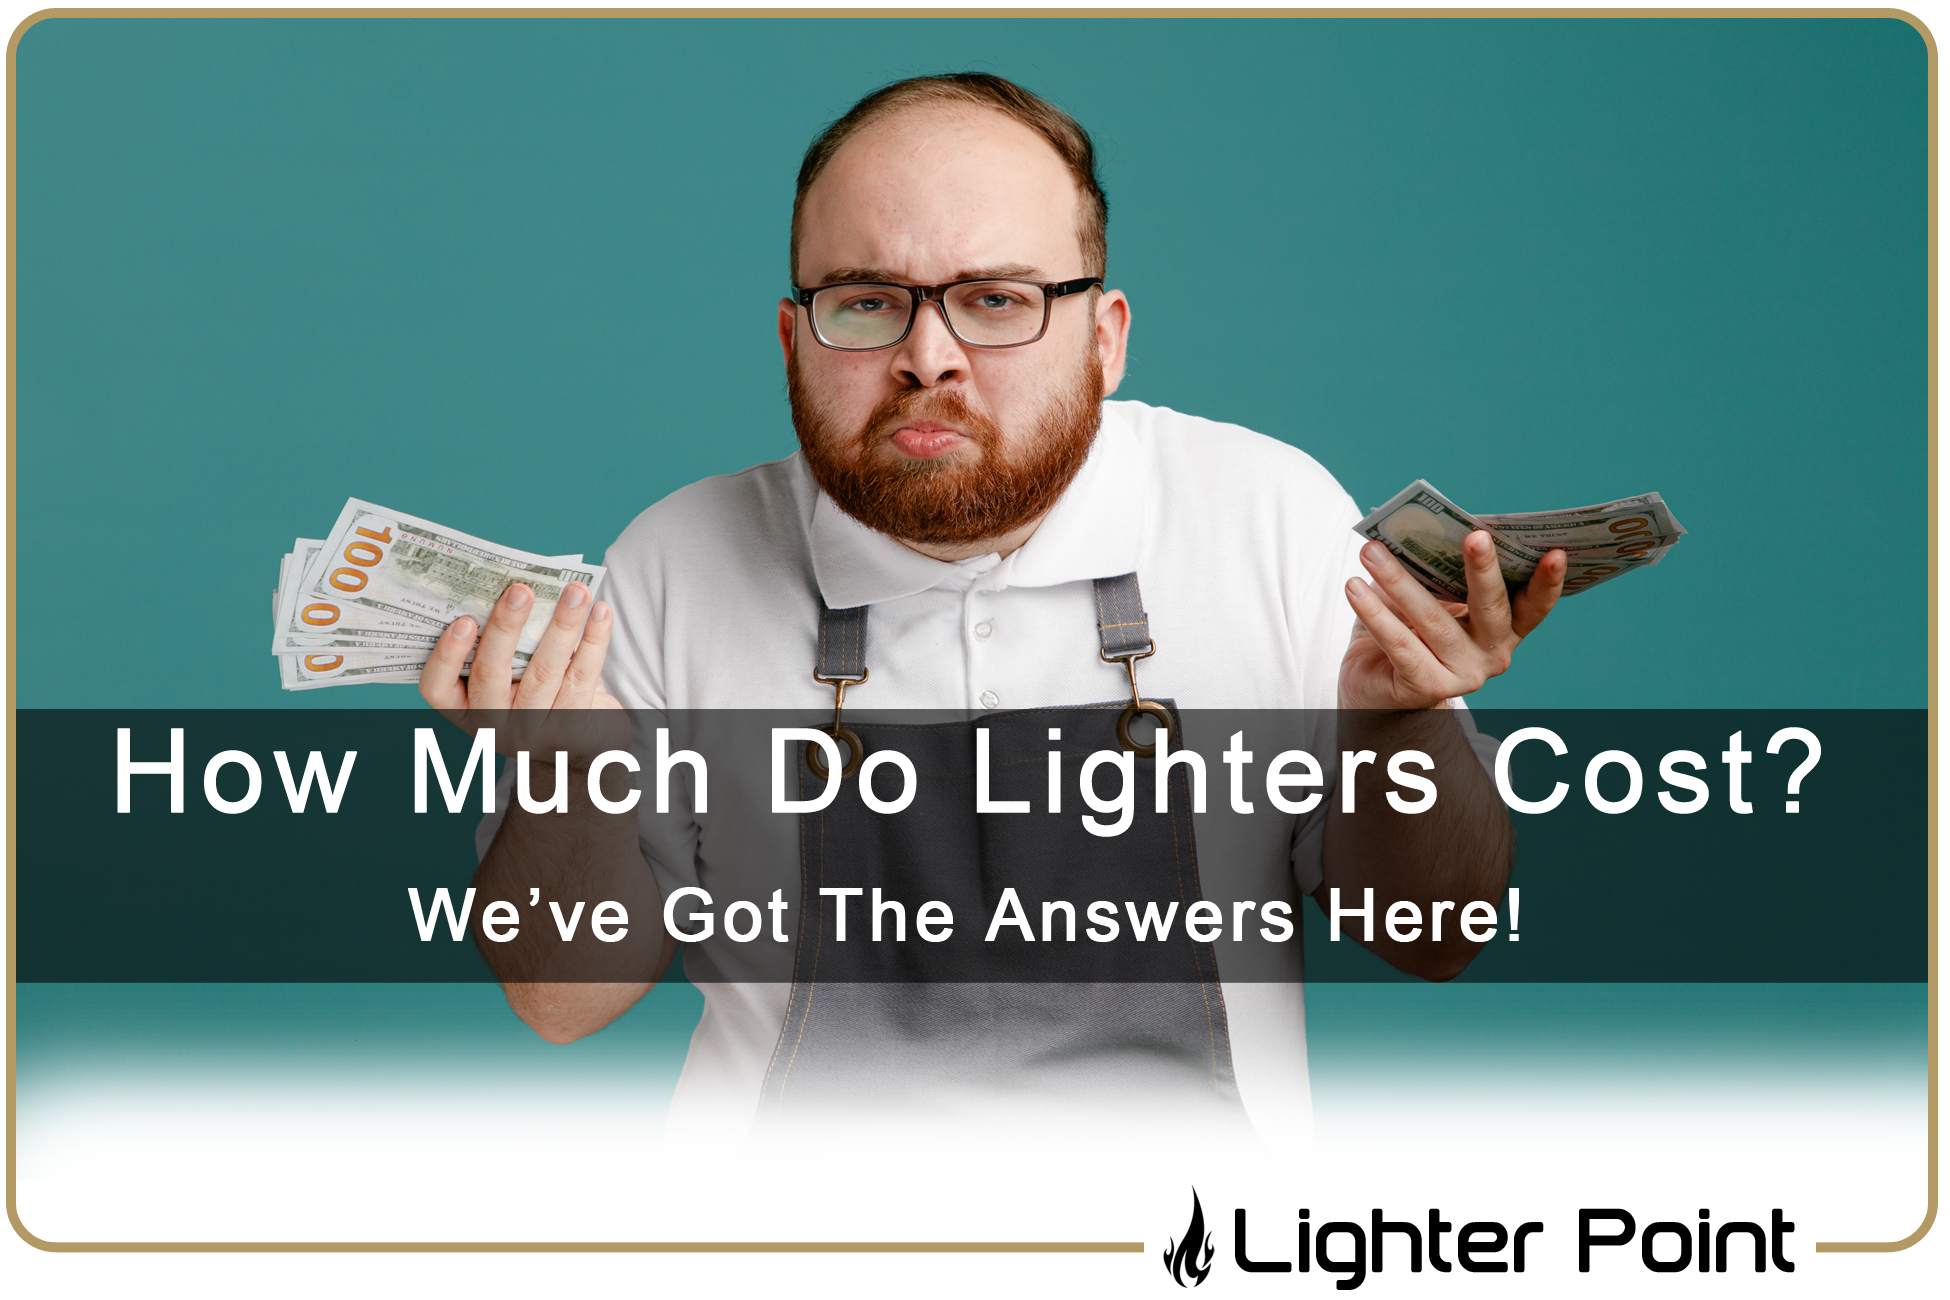 How Much Do Lighters Cost? We've the answer here!